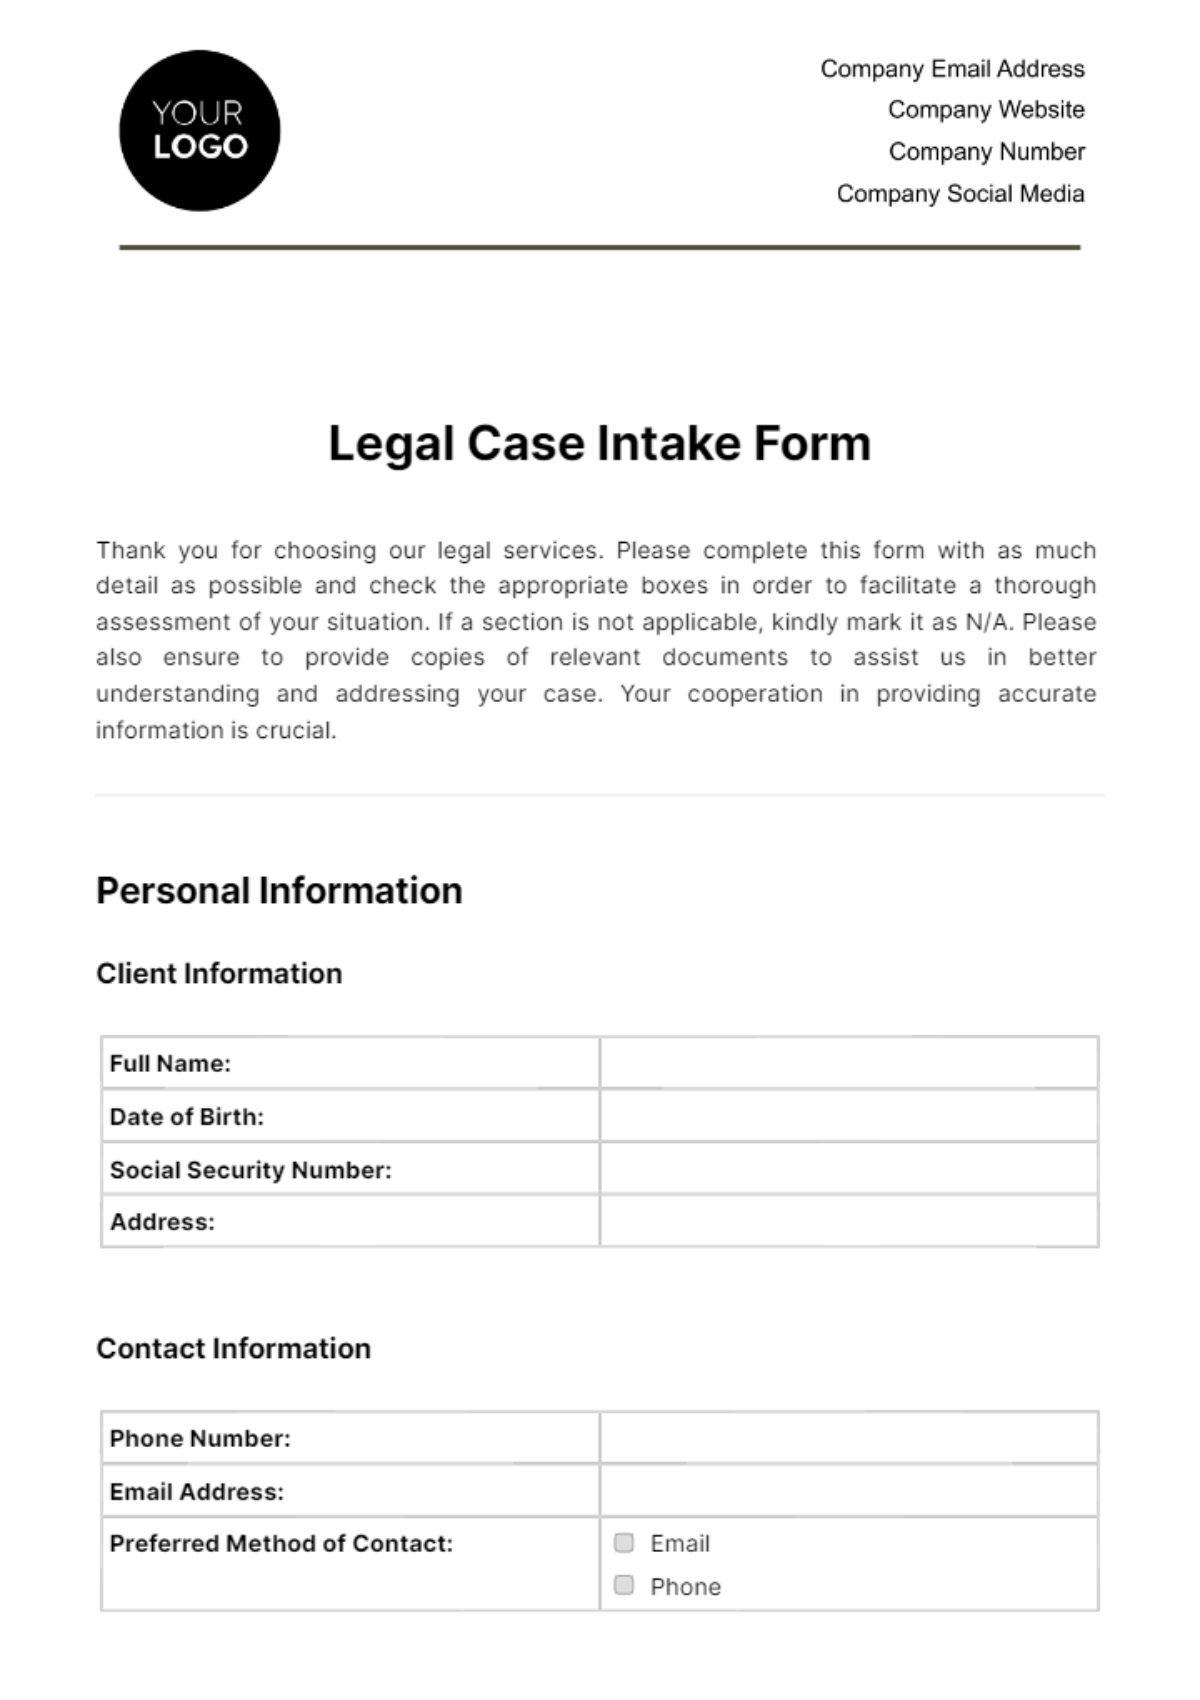 Free Legal Case Intake Form Template